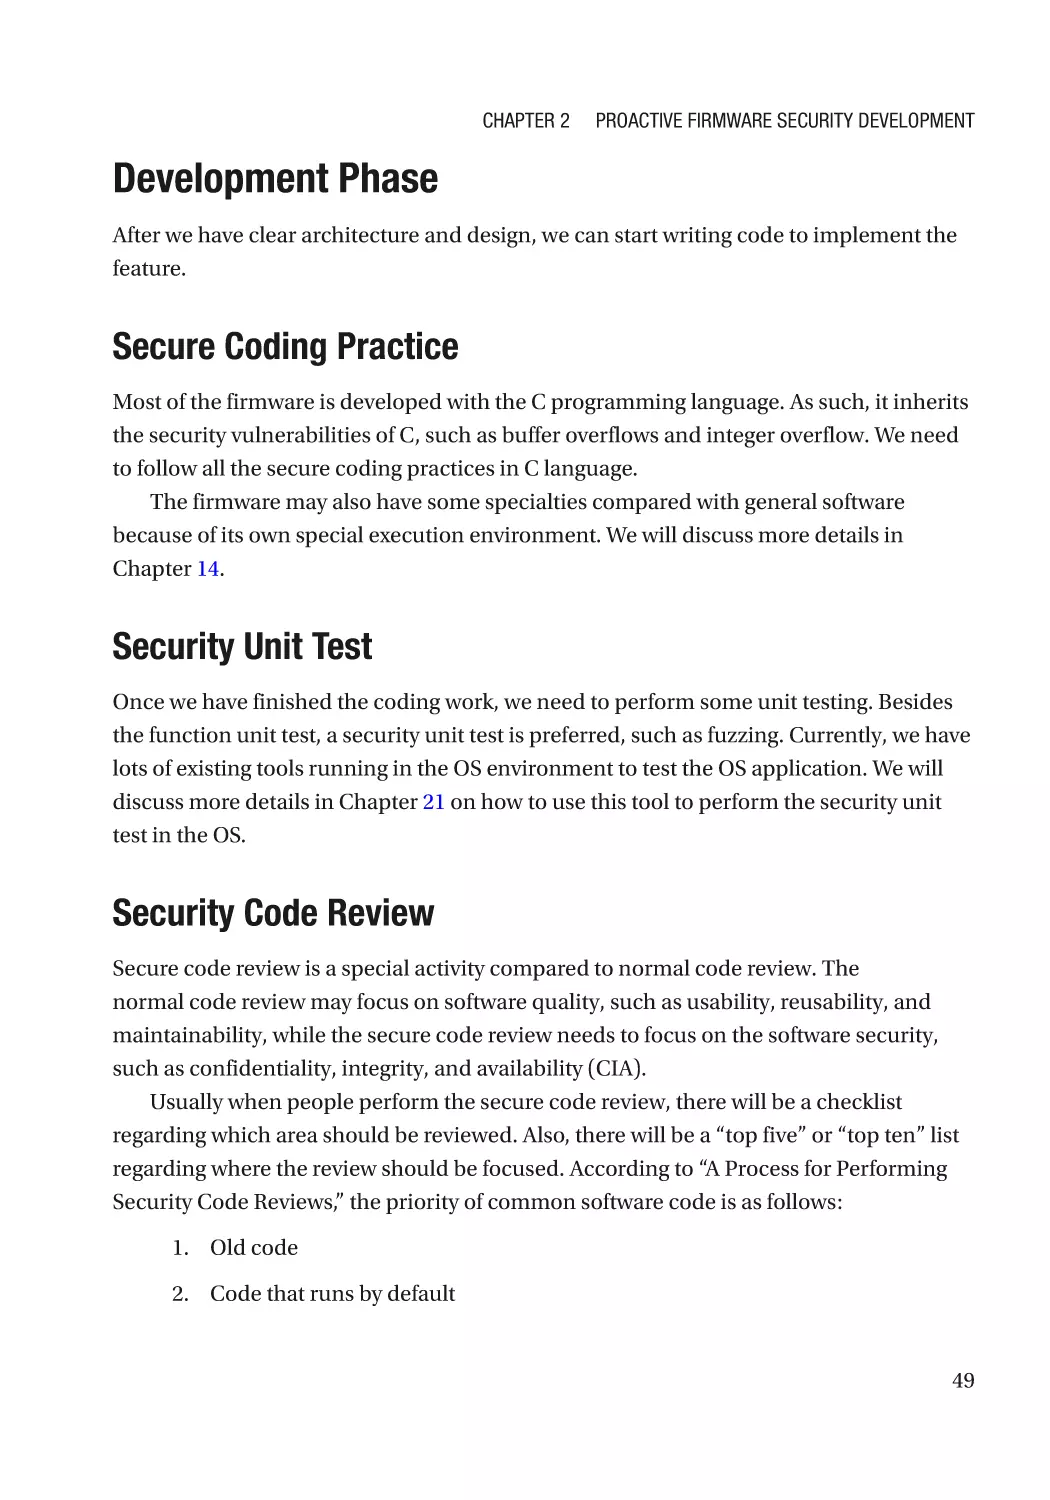 Development Phase
Secure Coding Practice
Security Unit Test
Security Code Review